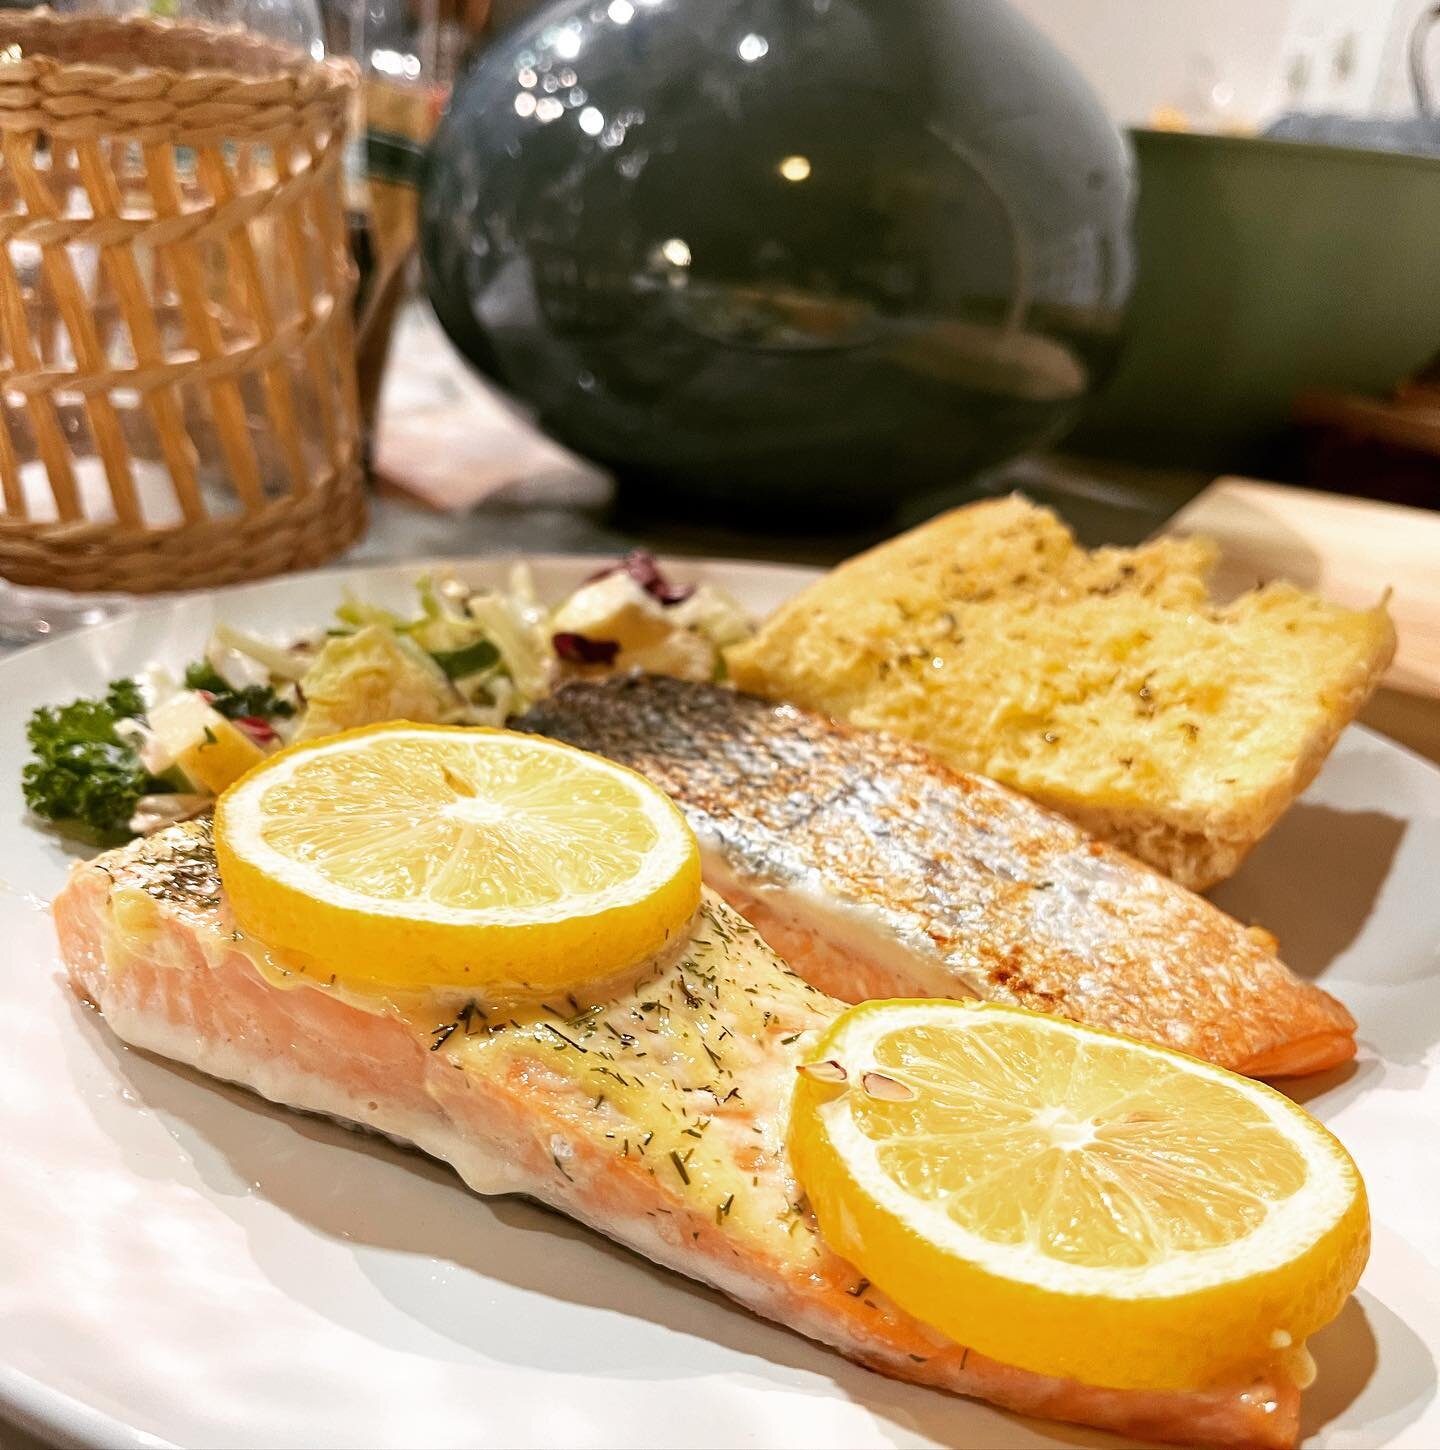 One of my favorite meals! Japanese Mayo Salmon with lemon and dill and a side of an apple, brie, kale salad and garlic bread! 

#personalchef #chef #bouldercolorado #smallbusiness #smallbusinessowner #food #healthyfood